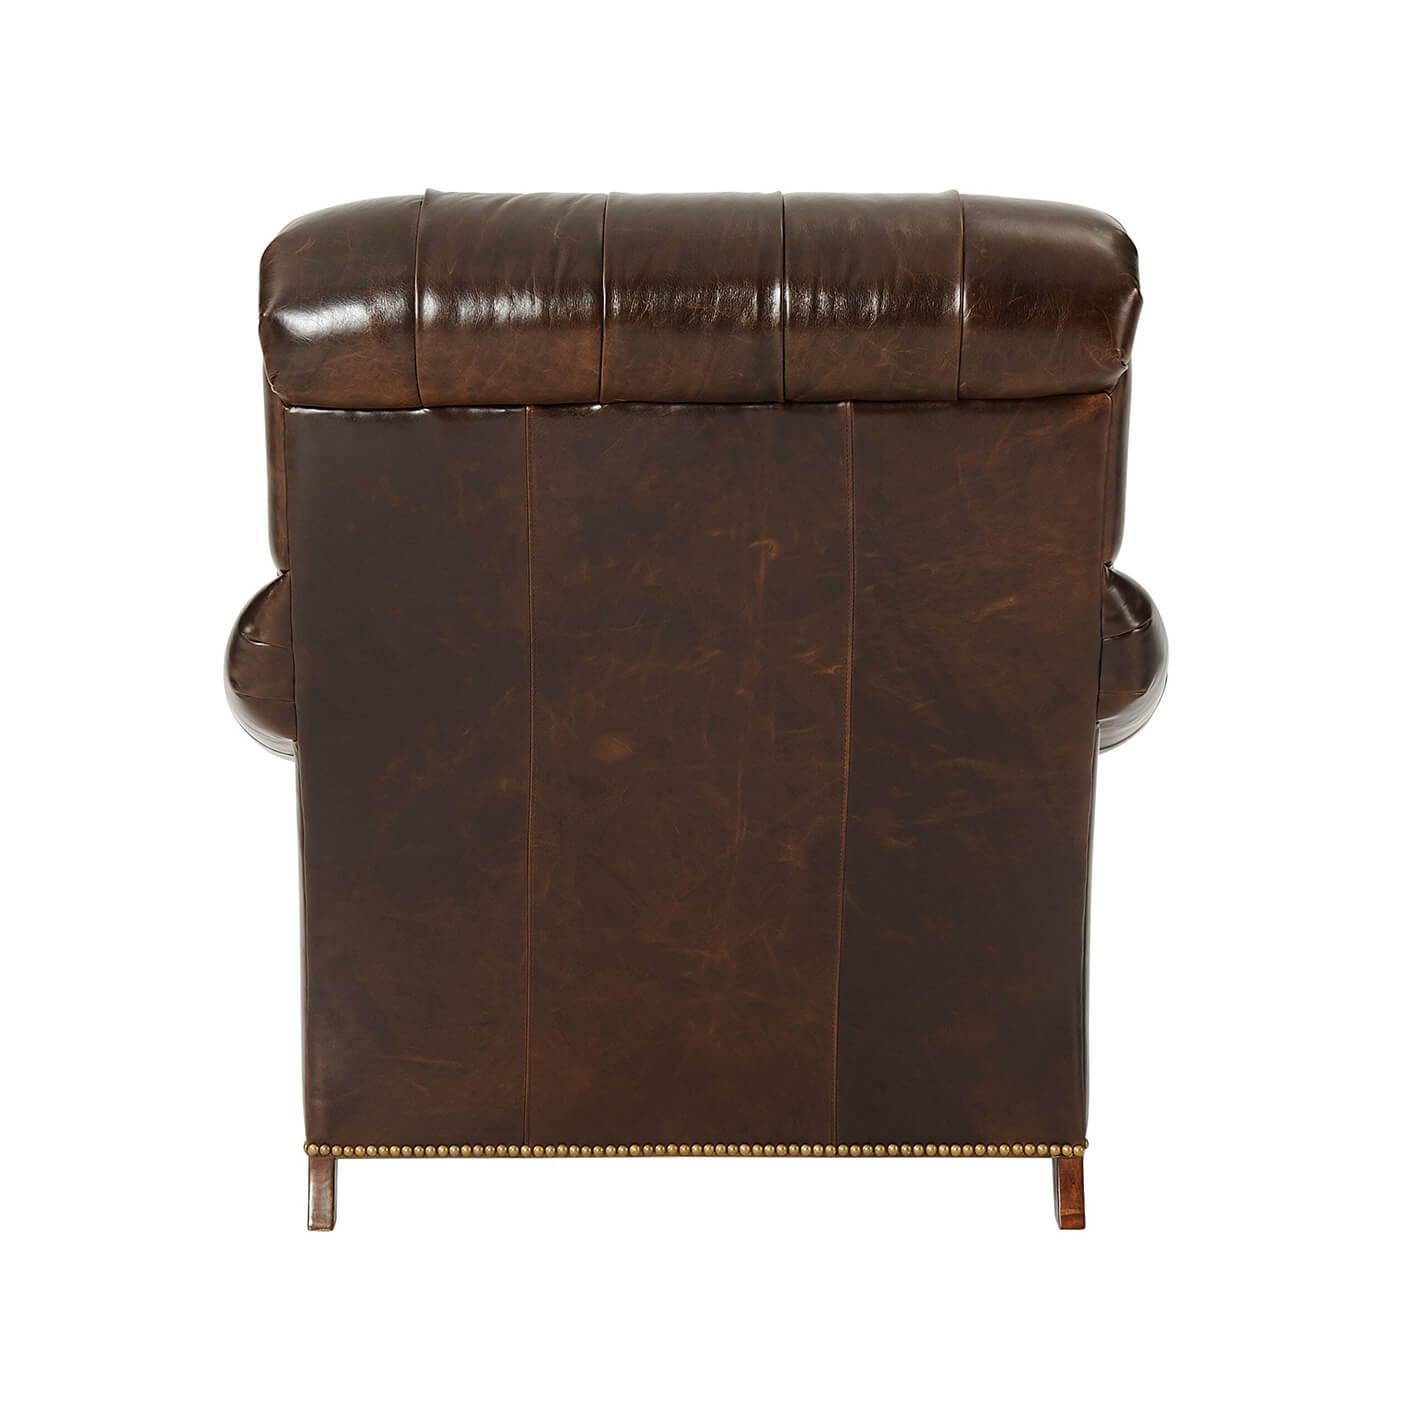 Vietnamese Leather Upholstered Club Chair For Sale